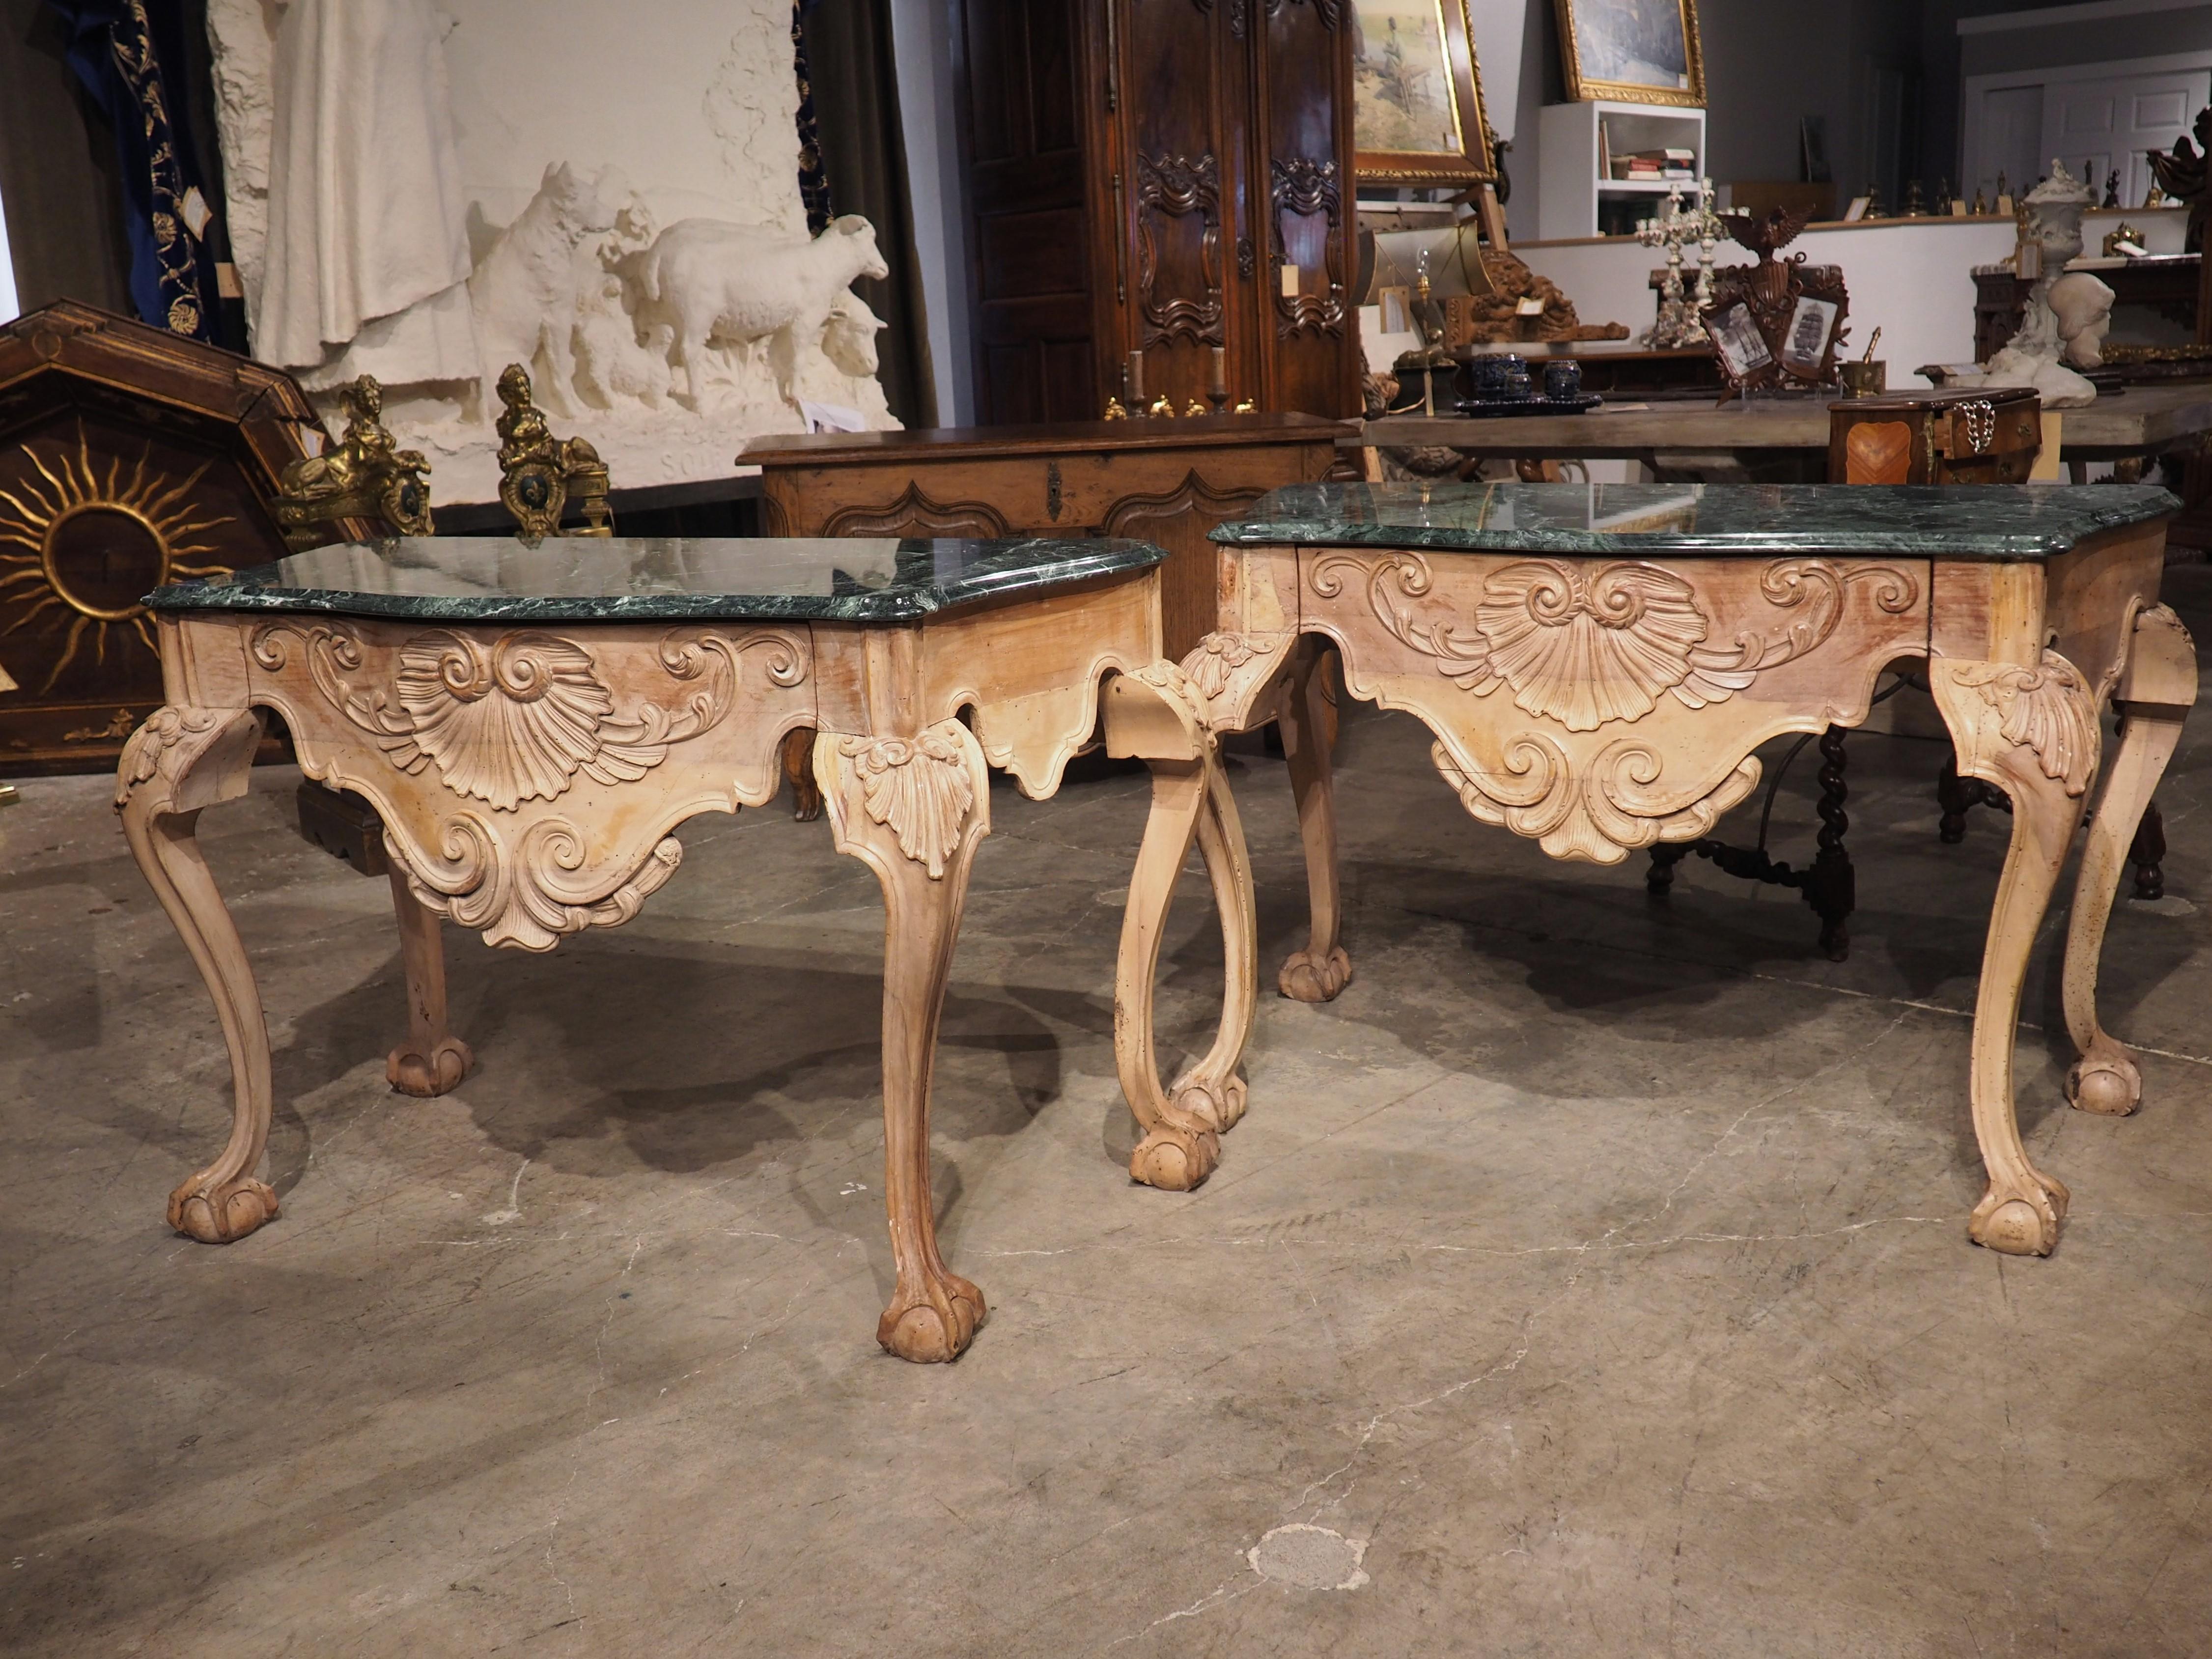 This handsome pair of English ball and claw console tables, from the 1700’s, are fitted with shaped, green marble tops. The cabriole legs with feet that resemble a claw grasping a ball was a design element that was highly popular in the middle of